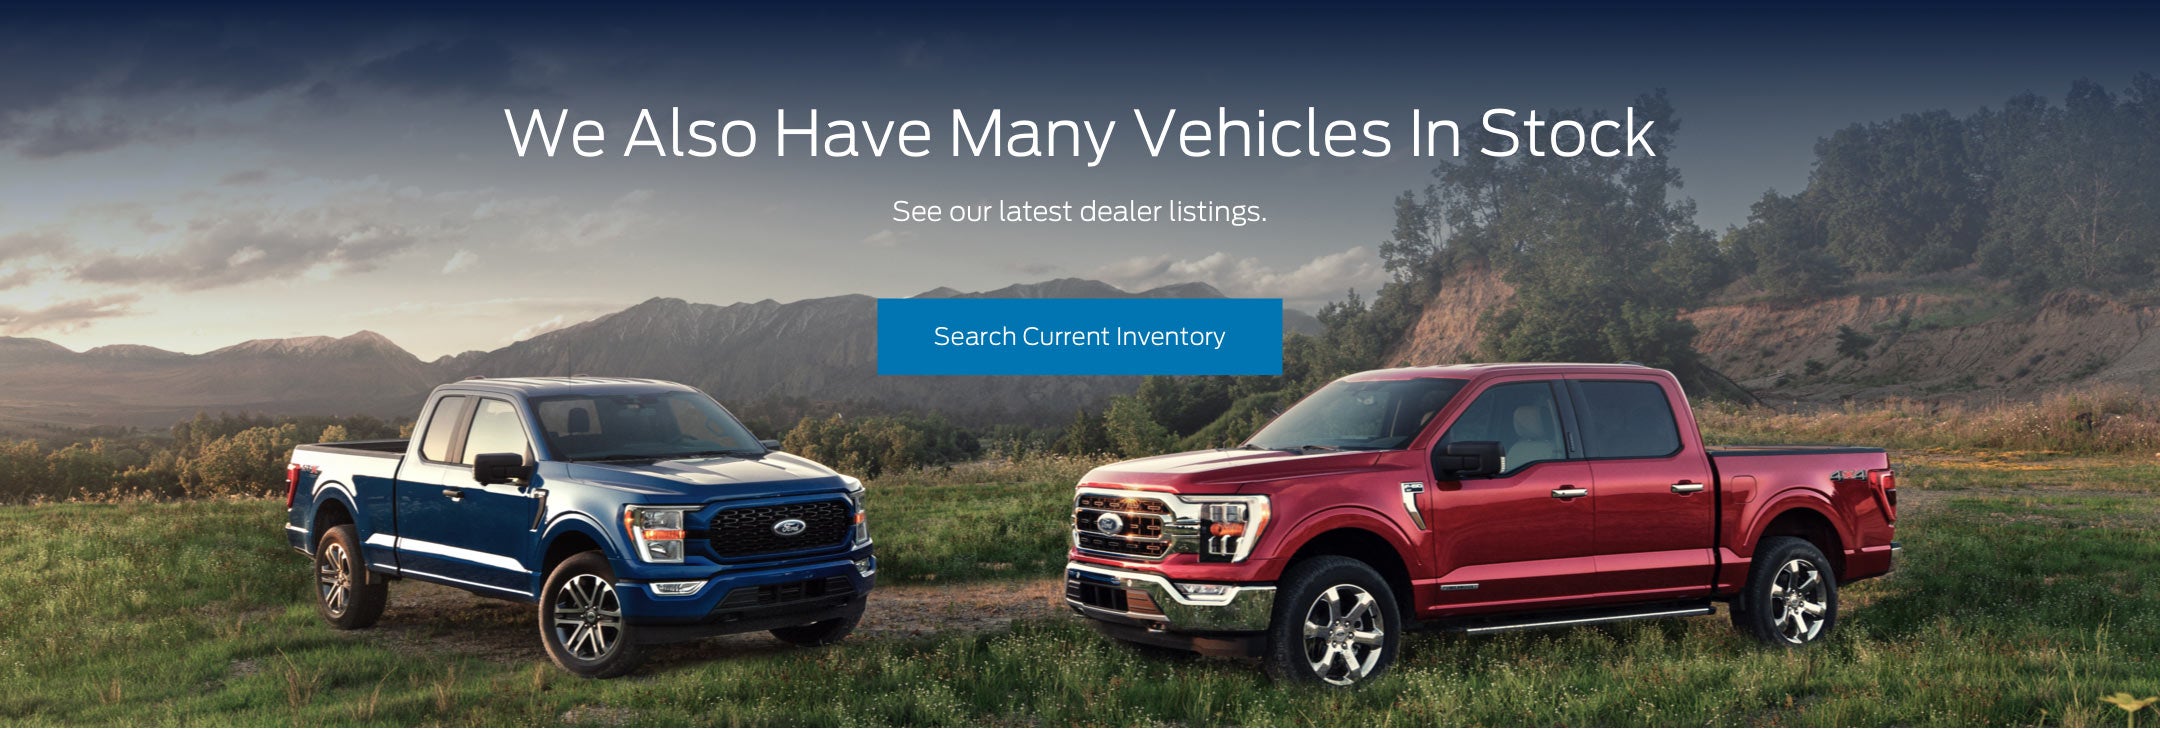 Ford vehicles in stock | Cocoa Ford in Cocoa FL